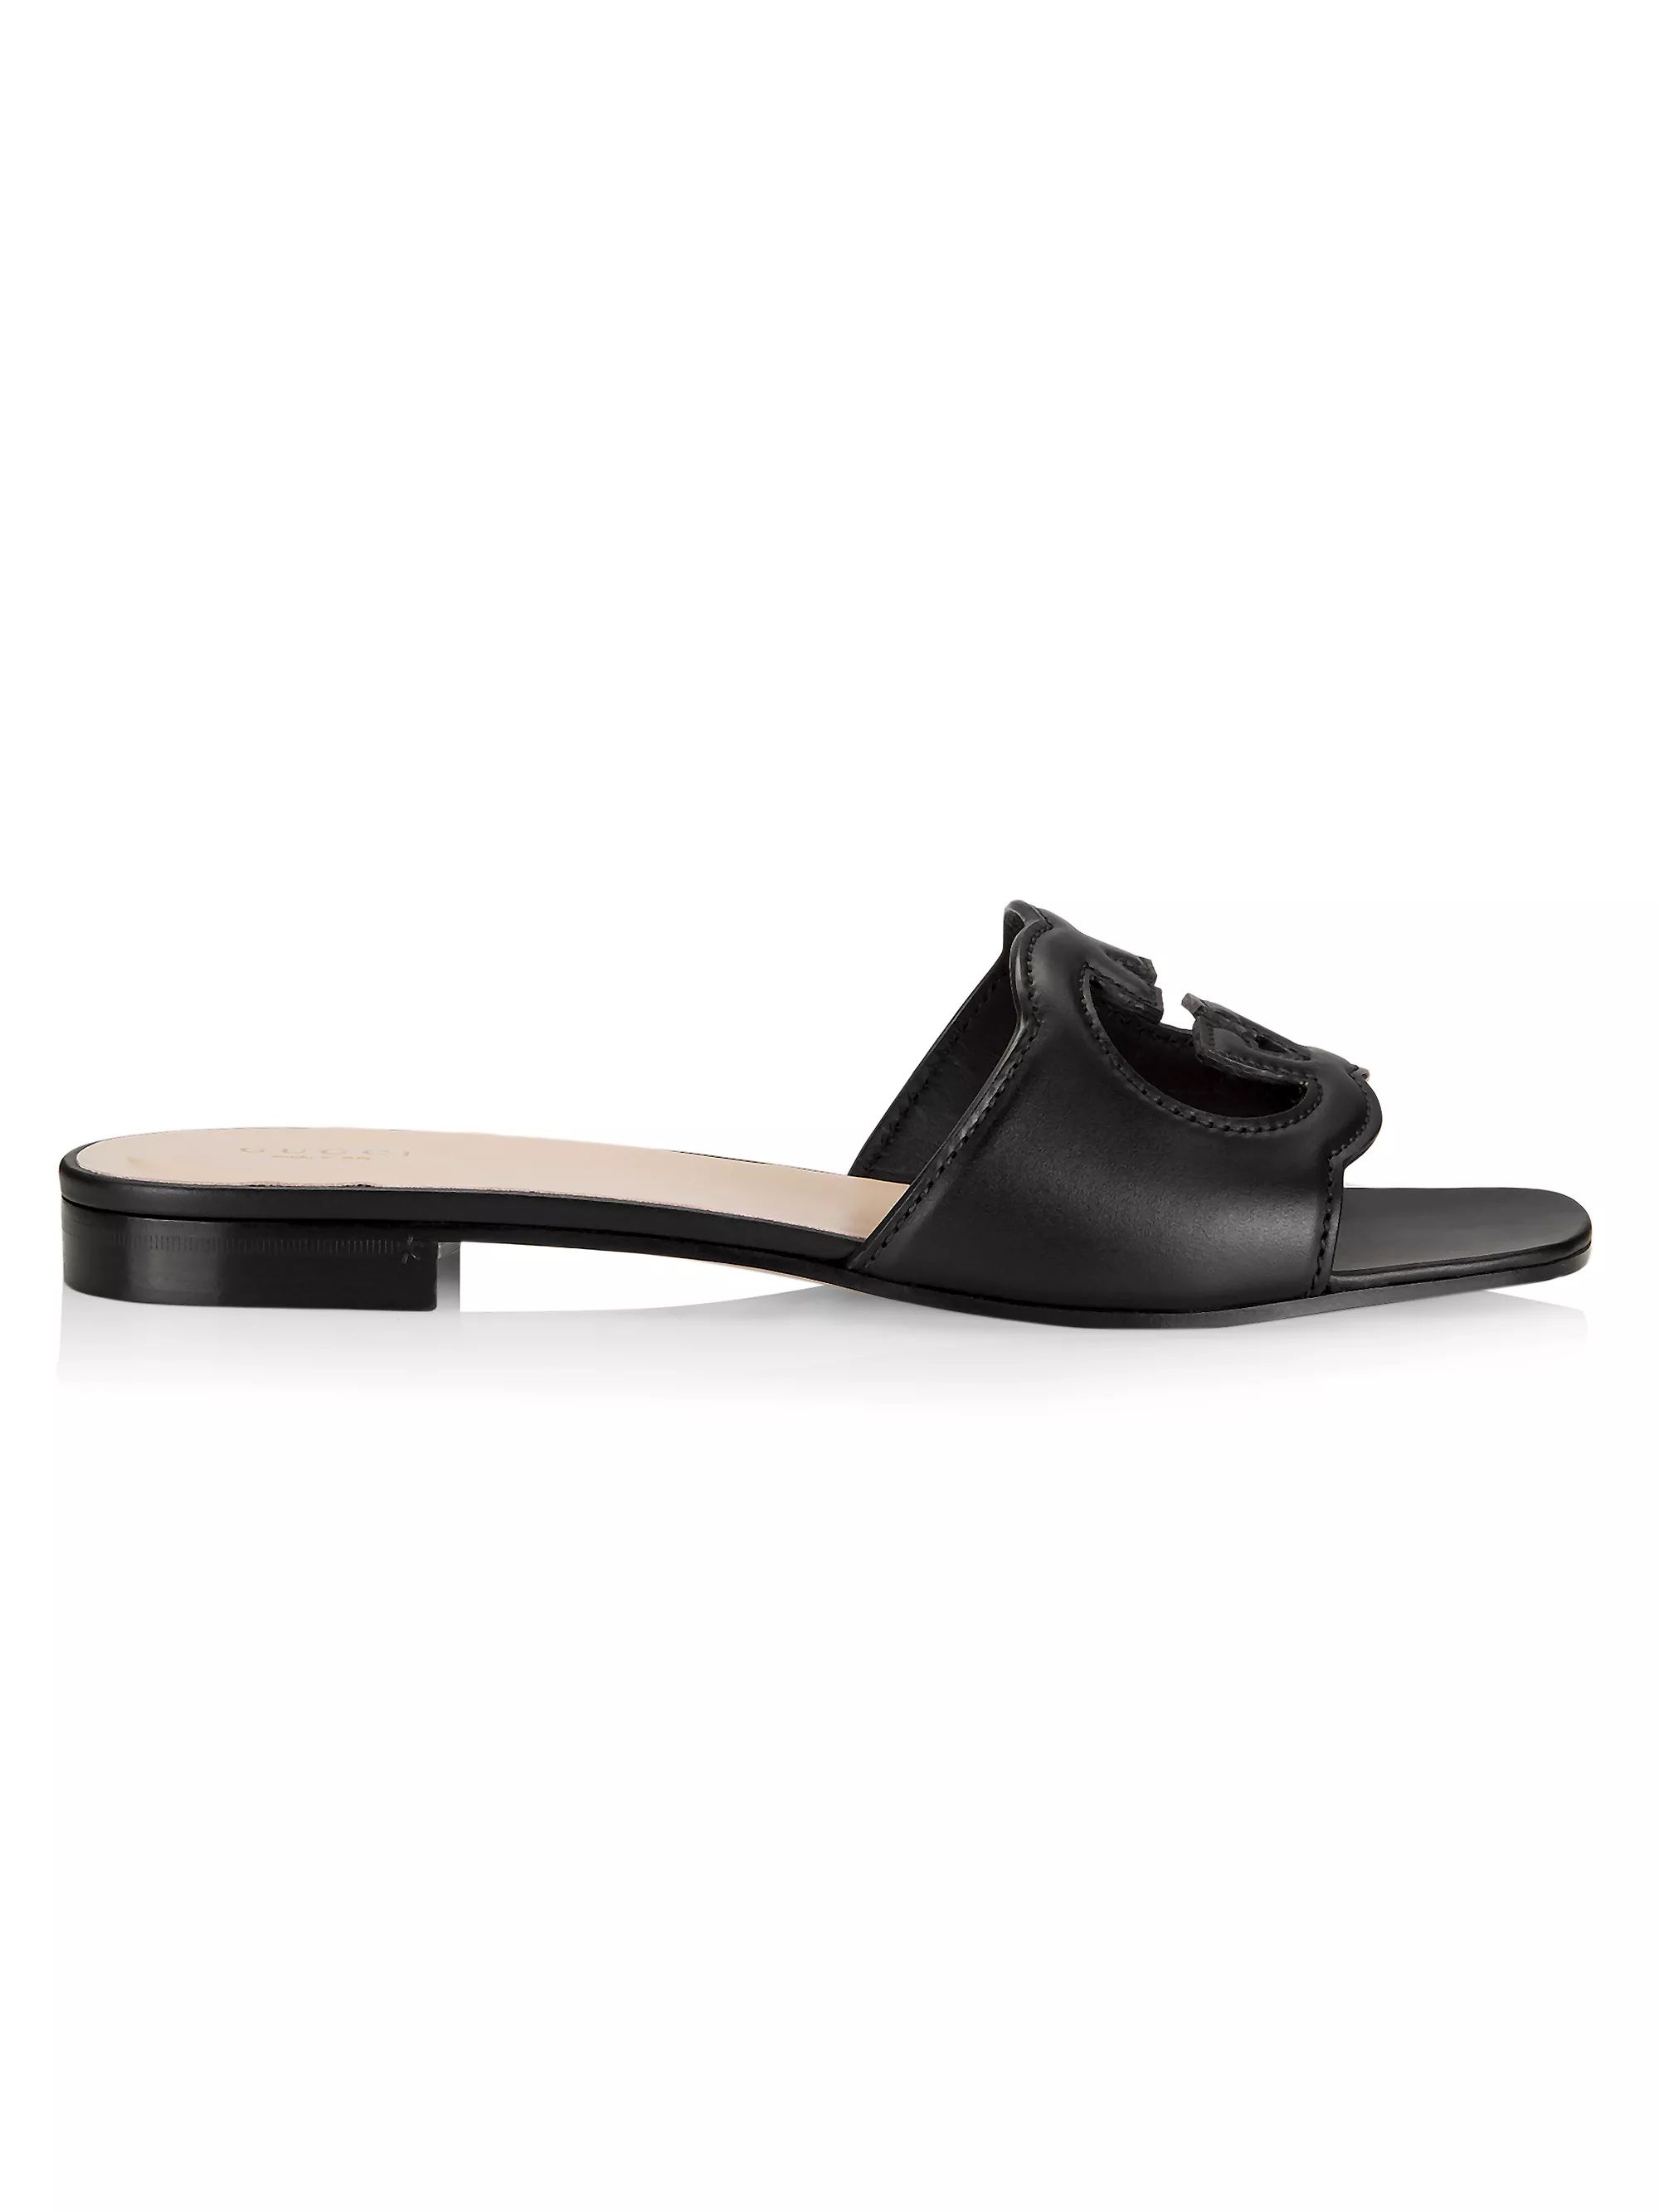 GG Cut-Out Leather Slides | Saks Fifth Avenue